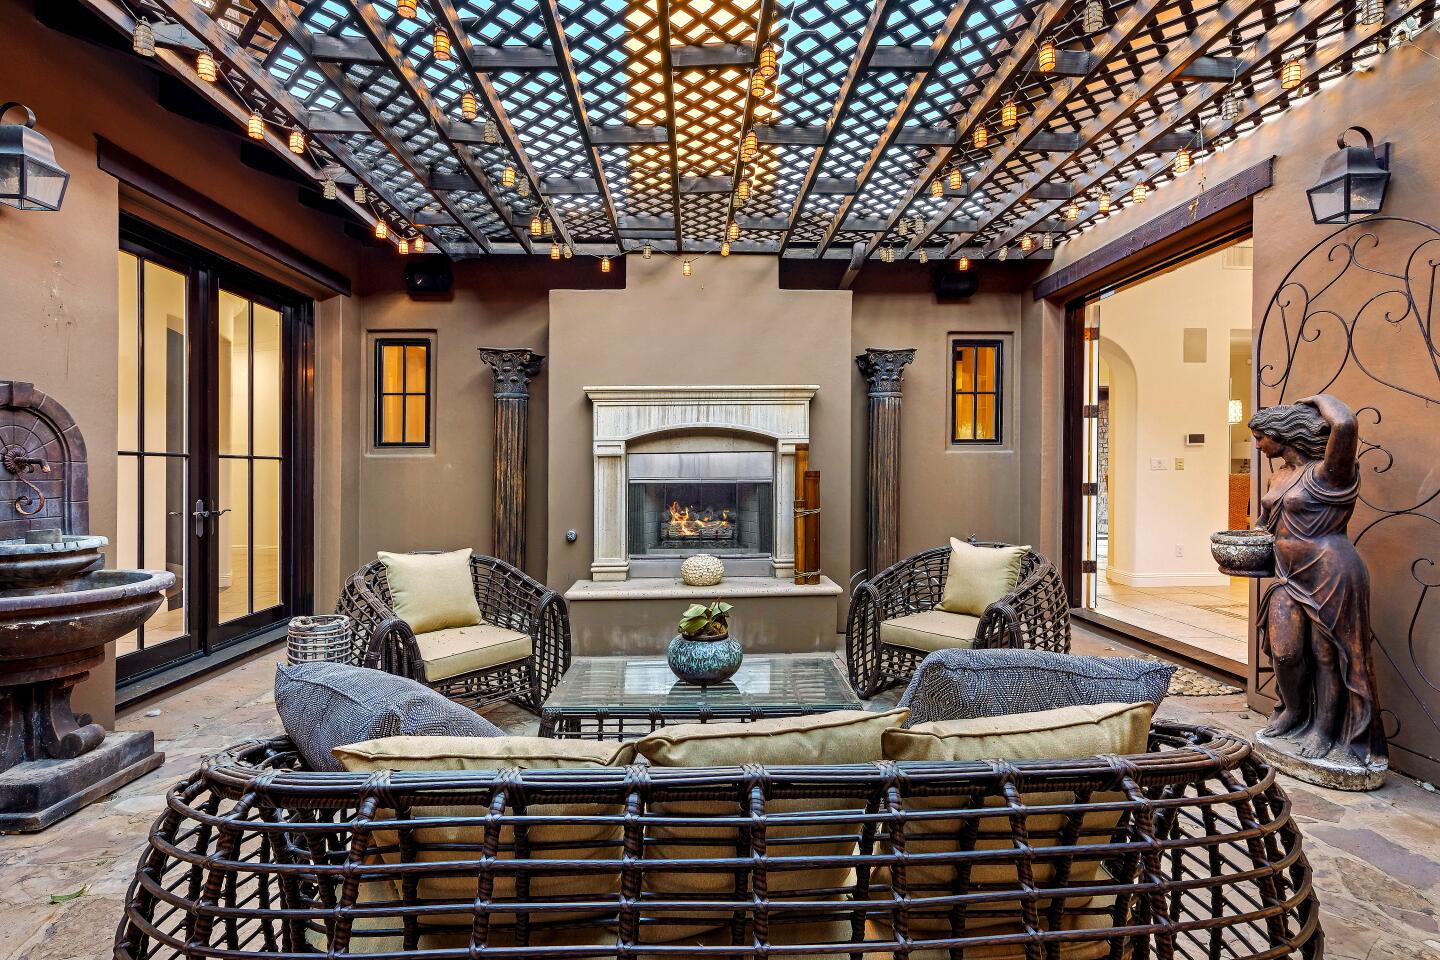 Remodeled by rapper Logic during his stay, this gated home in Calabasas includes a recording studio and a pergola-covered courtyard.